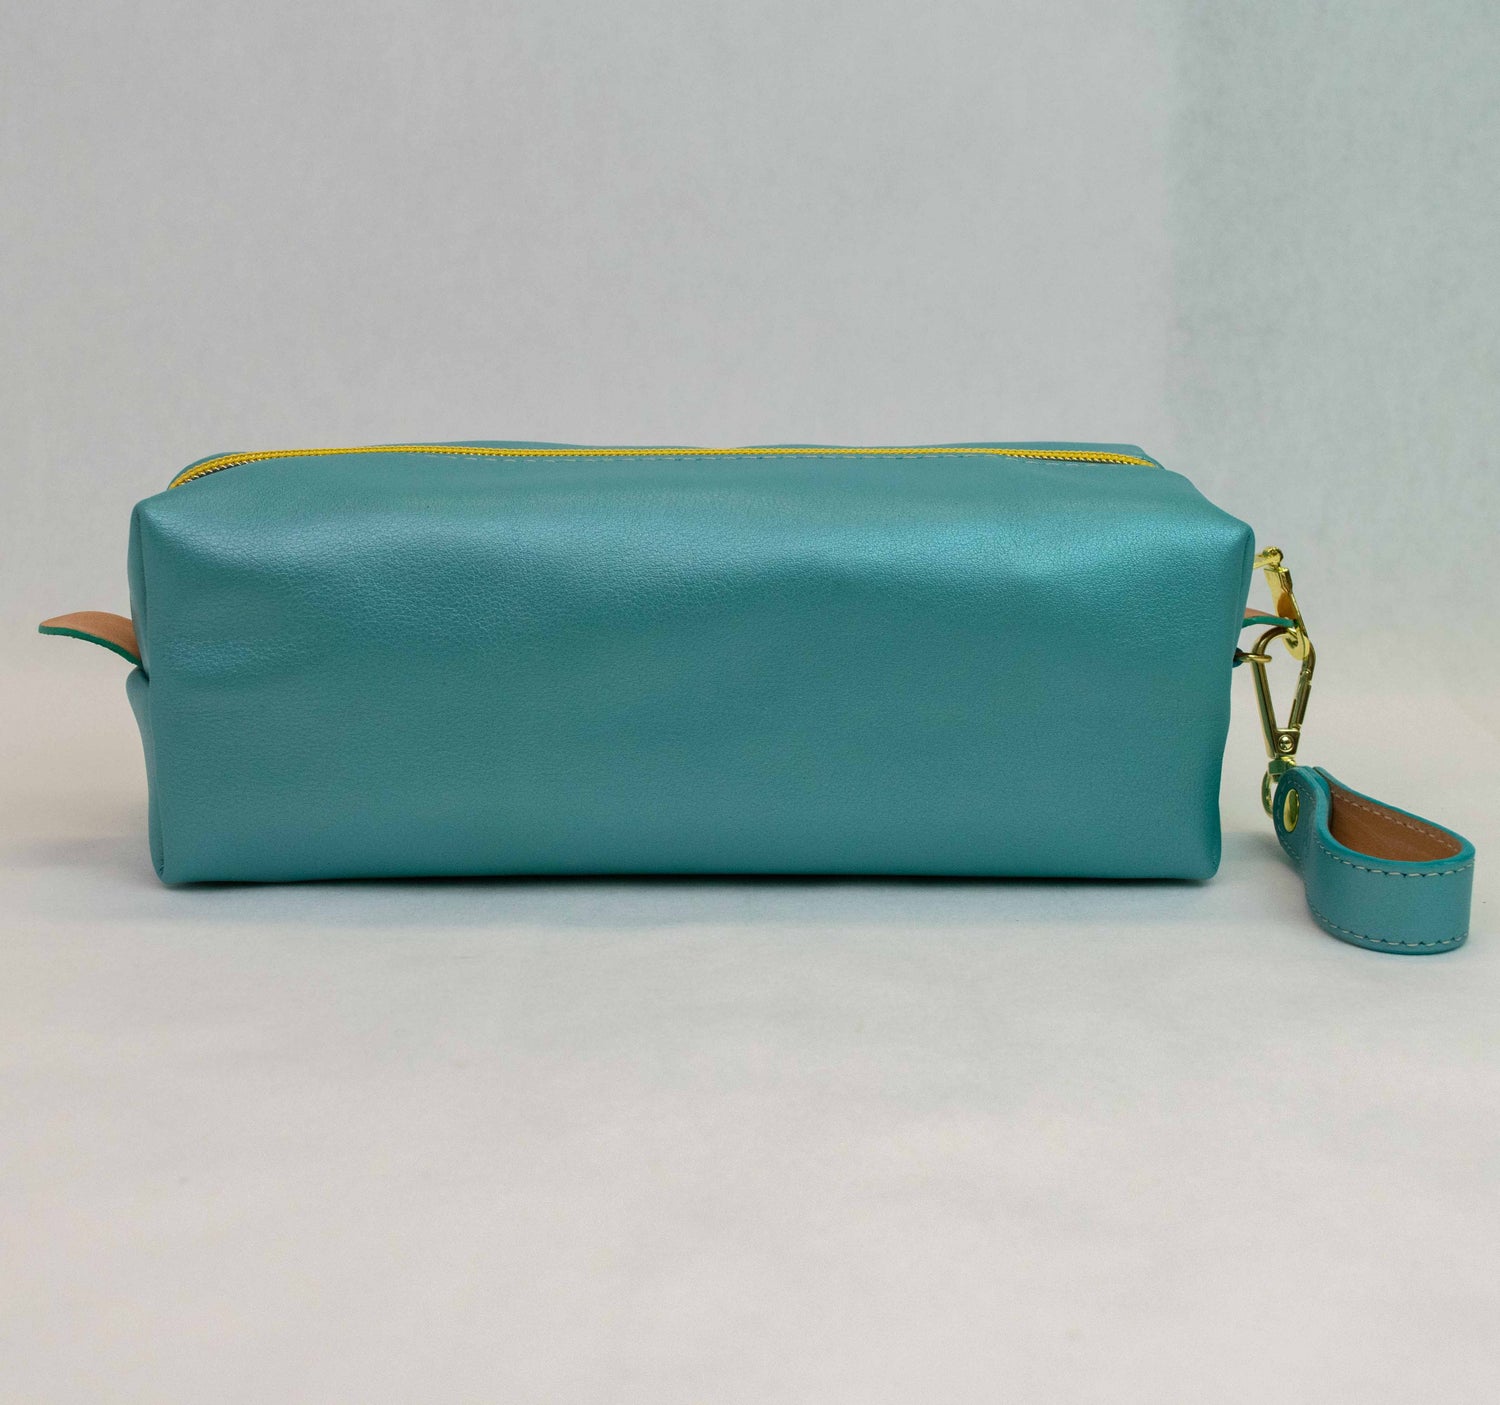 Back view of T5 bath dopp kit toiletry wash bag designer handcrafted of smooth calf leather in frosted turquoise..